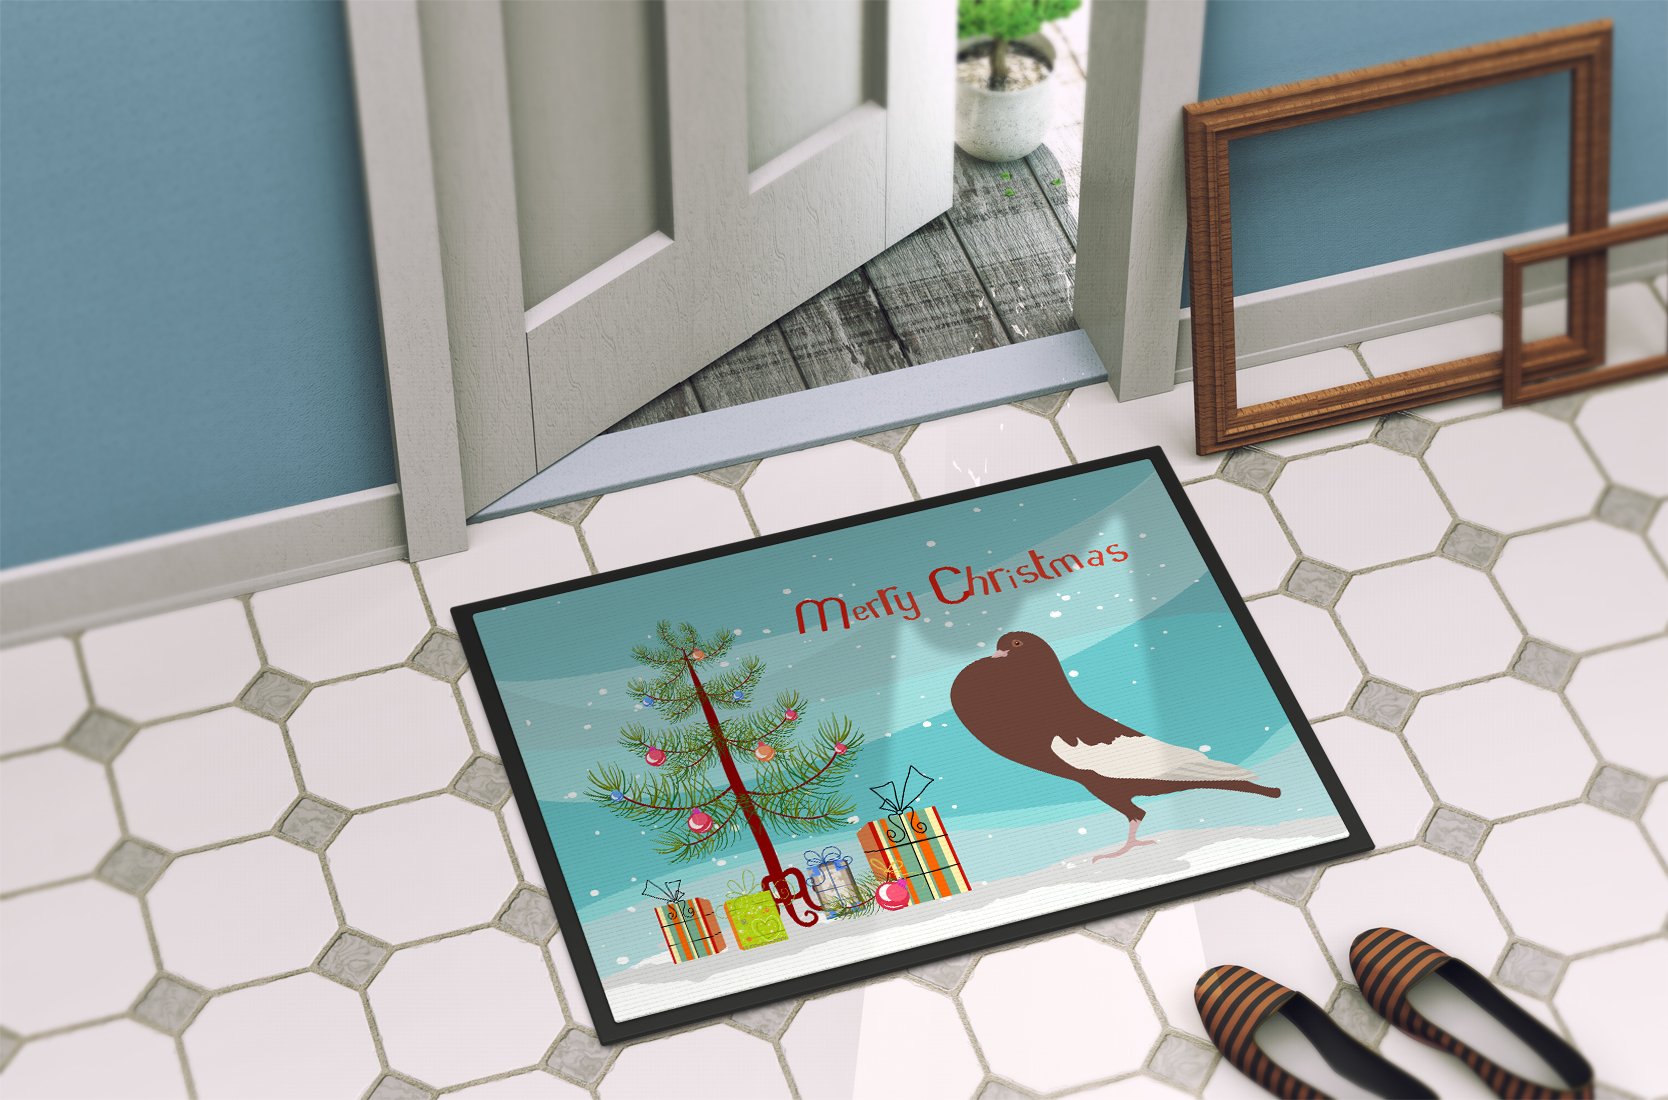 English Pouter Pigeon Christmas Indoor or Outdoor Mat 24x36 BB9321JMAT by Caroline's Treasures